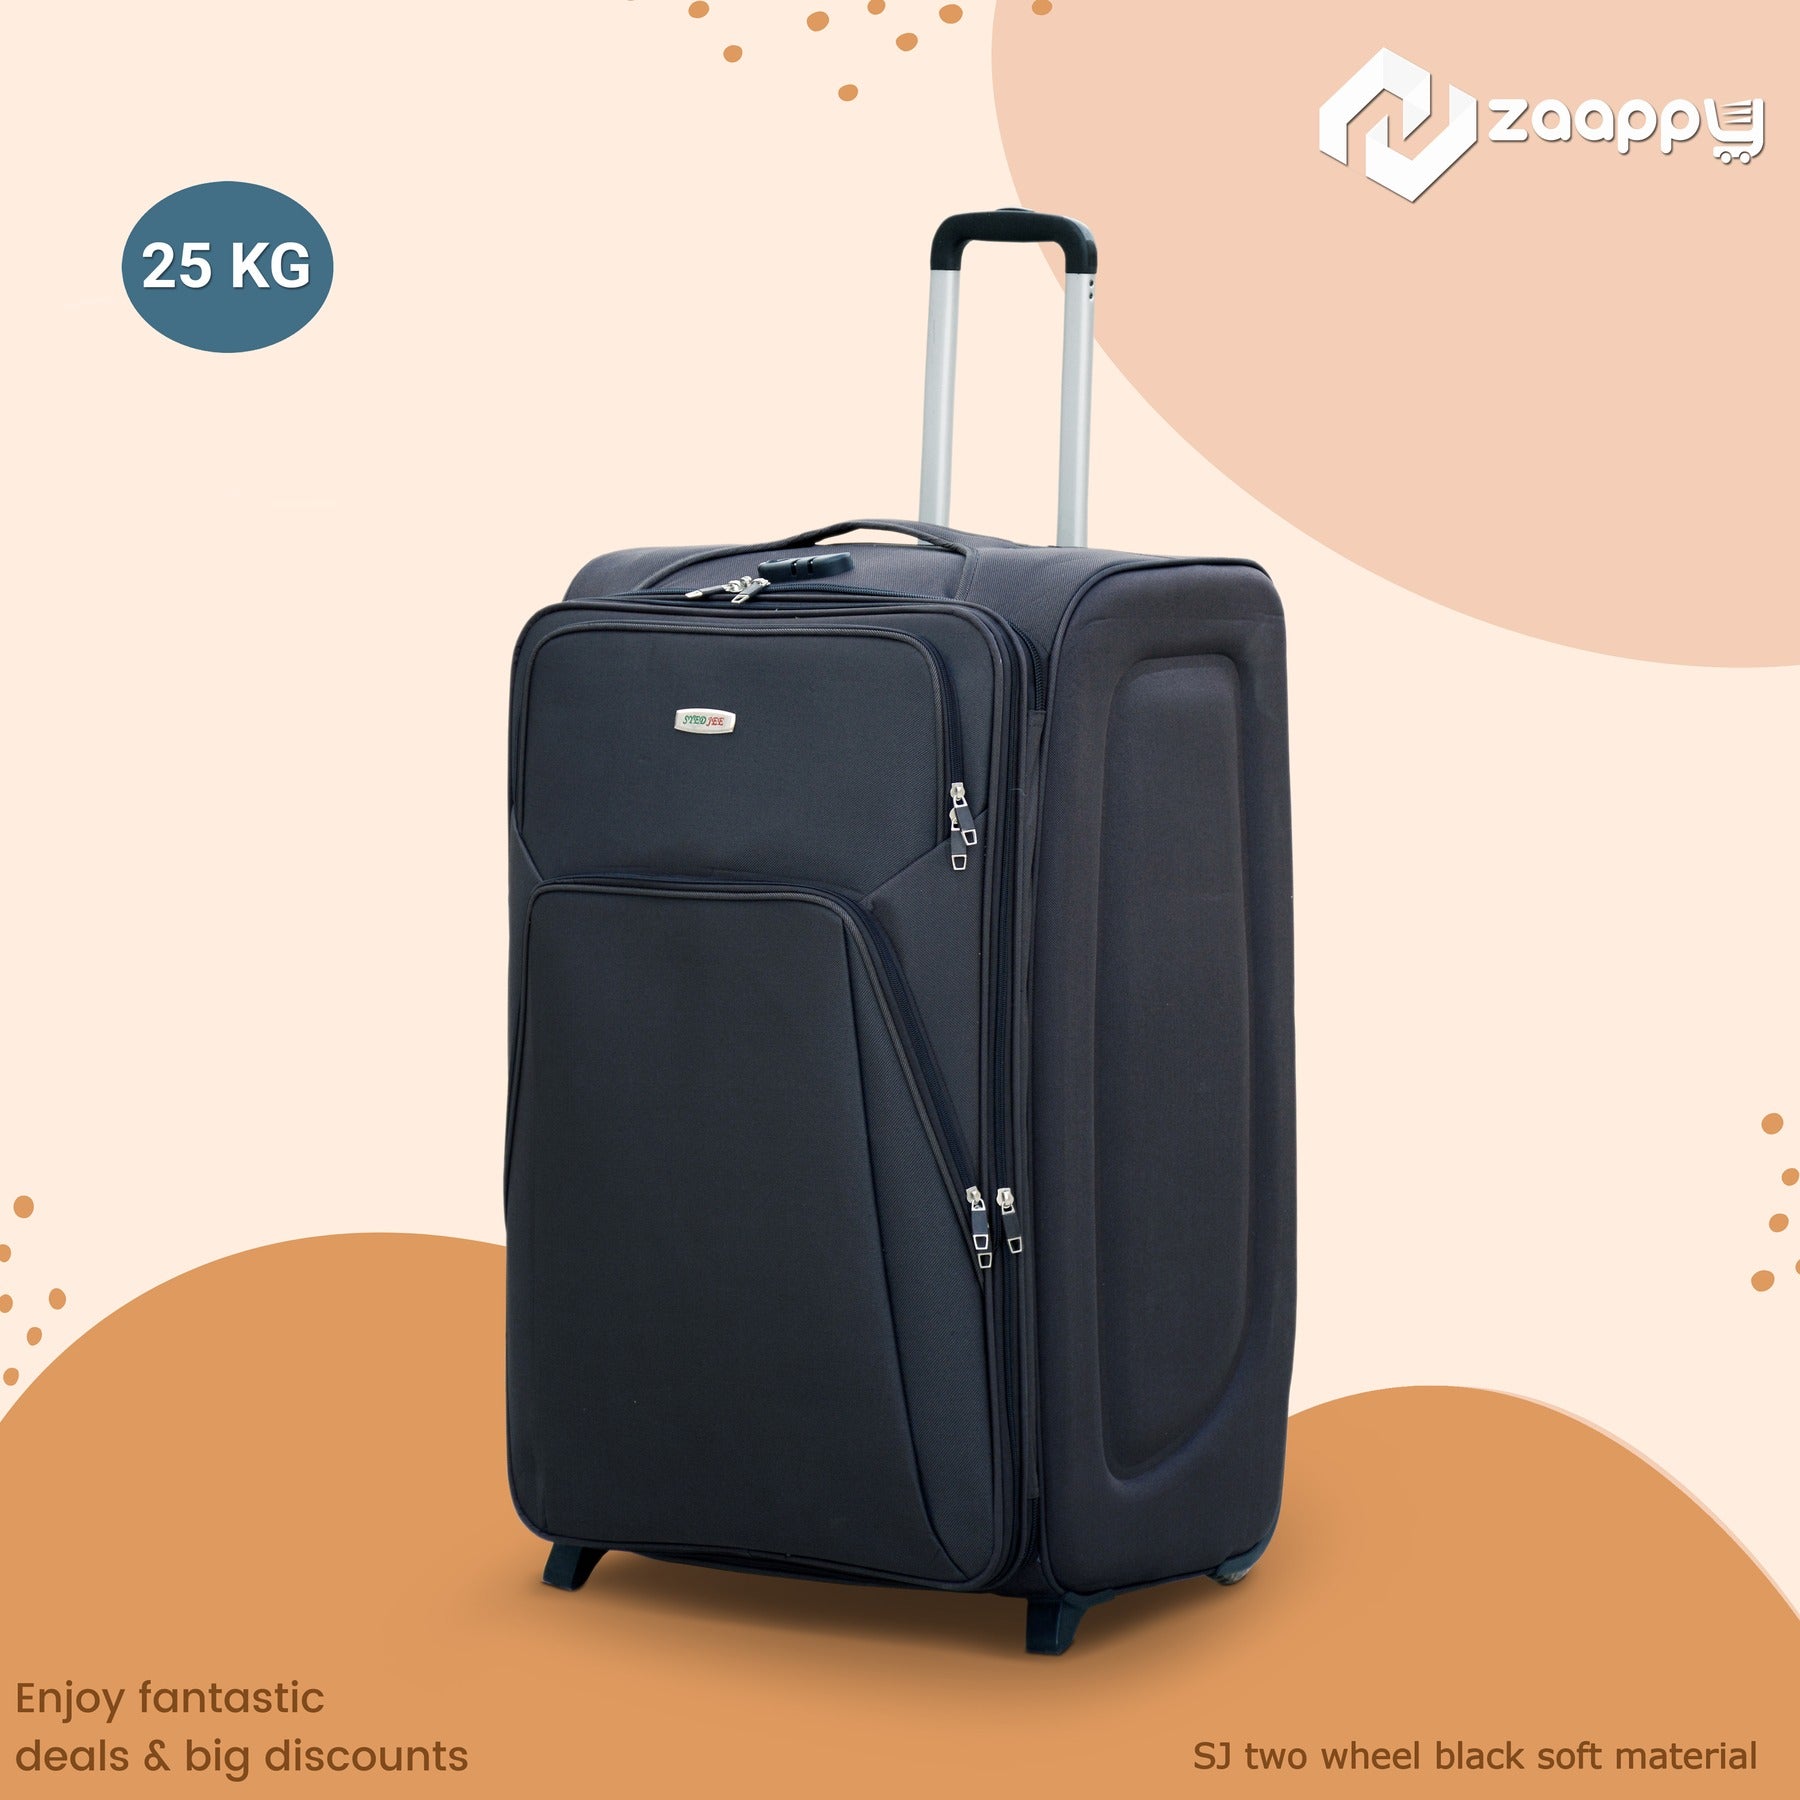 Soft Material Luggage Black Colour 20-25 Kg 2 Wheel Travel Luggage